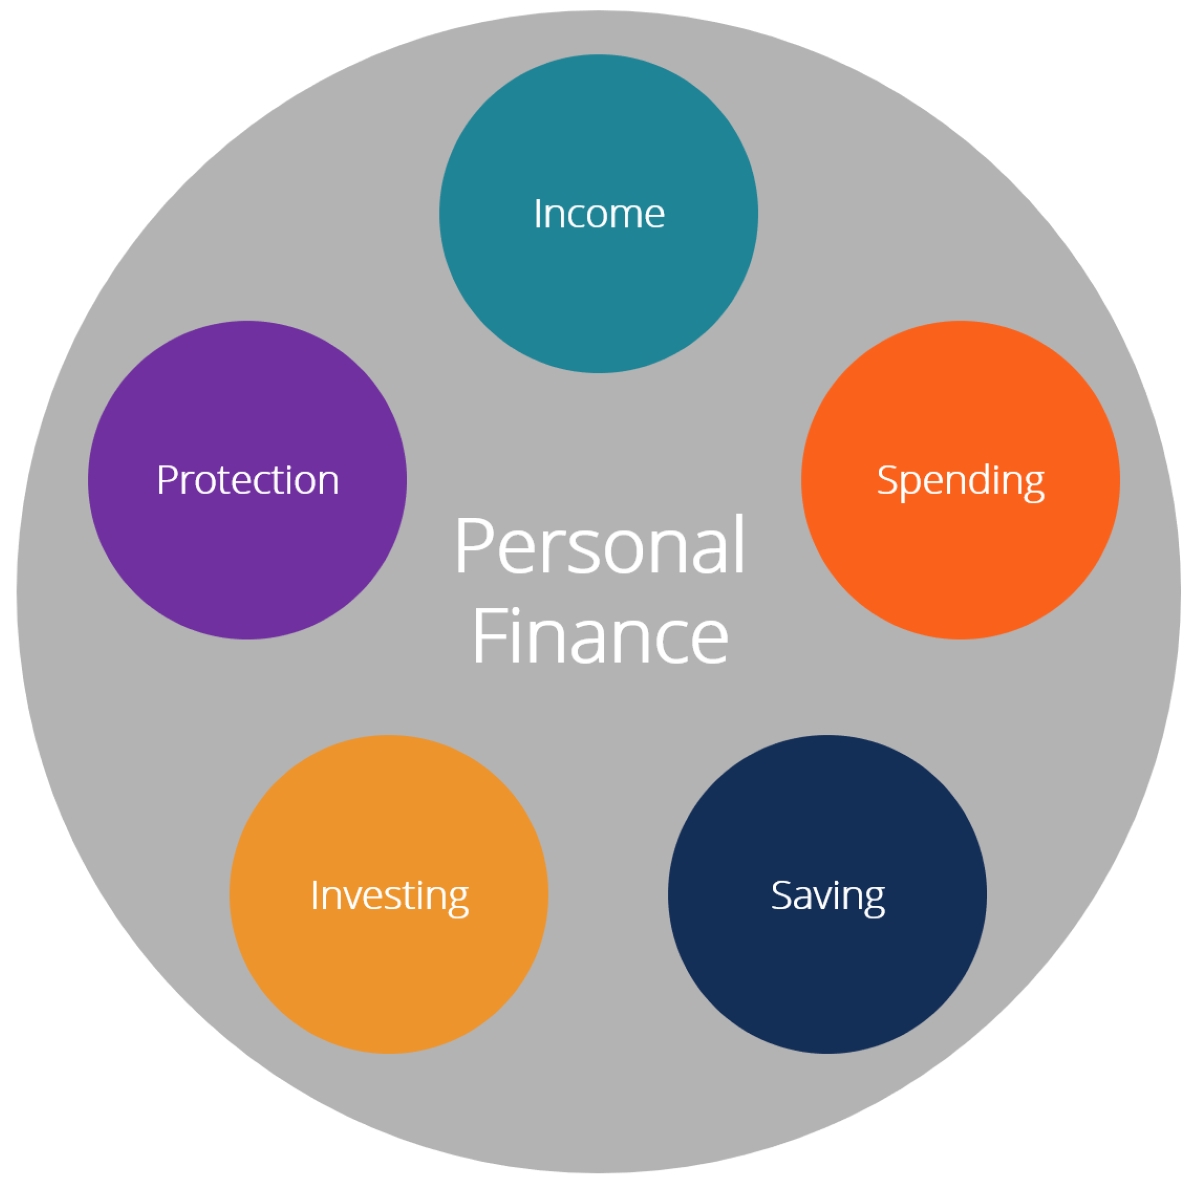 What Are The Five Foundations Of Personal Finance?